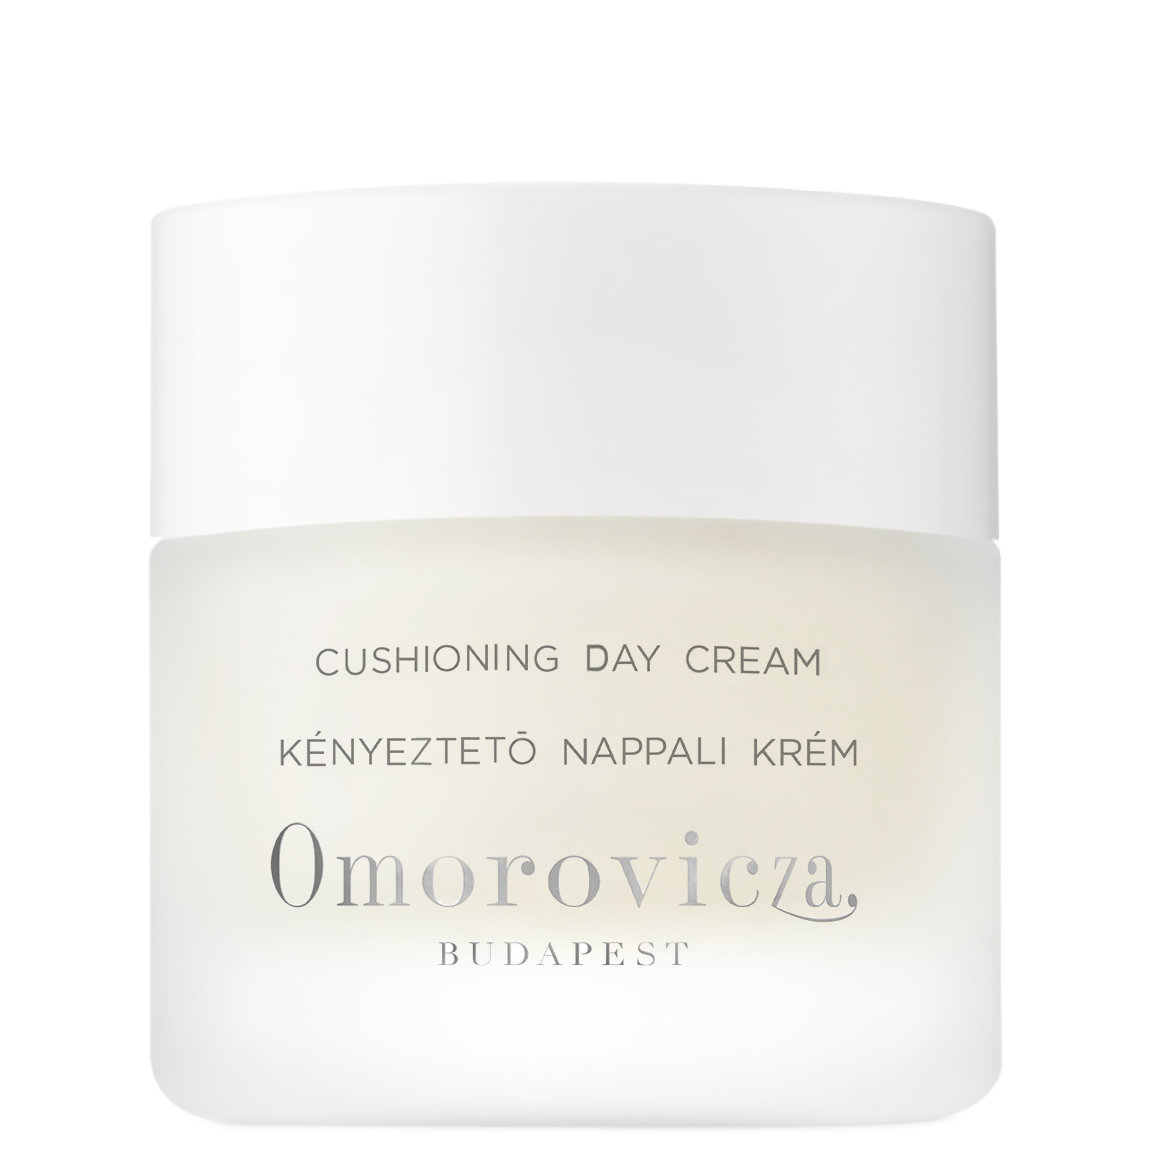 Omorovicza Cushioning Day Cream alternative view 1 - product swatch.